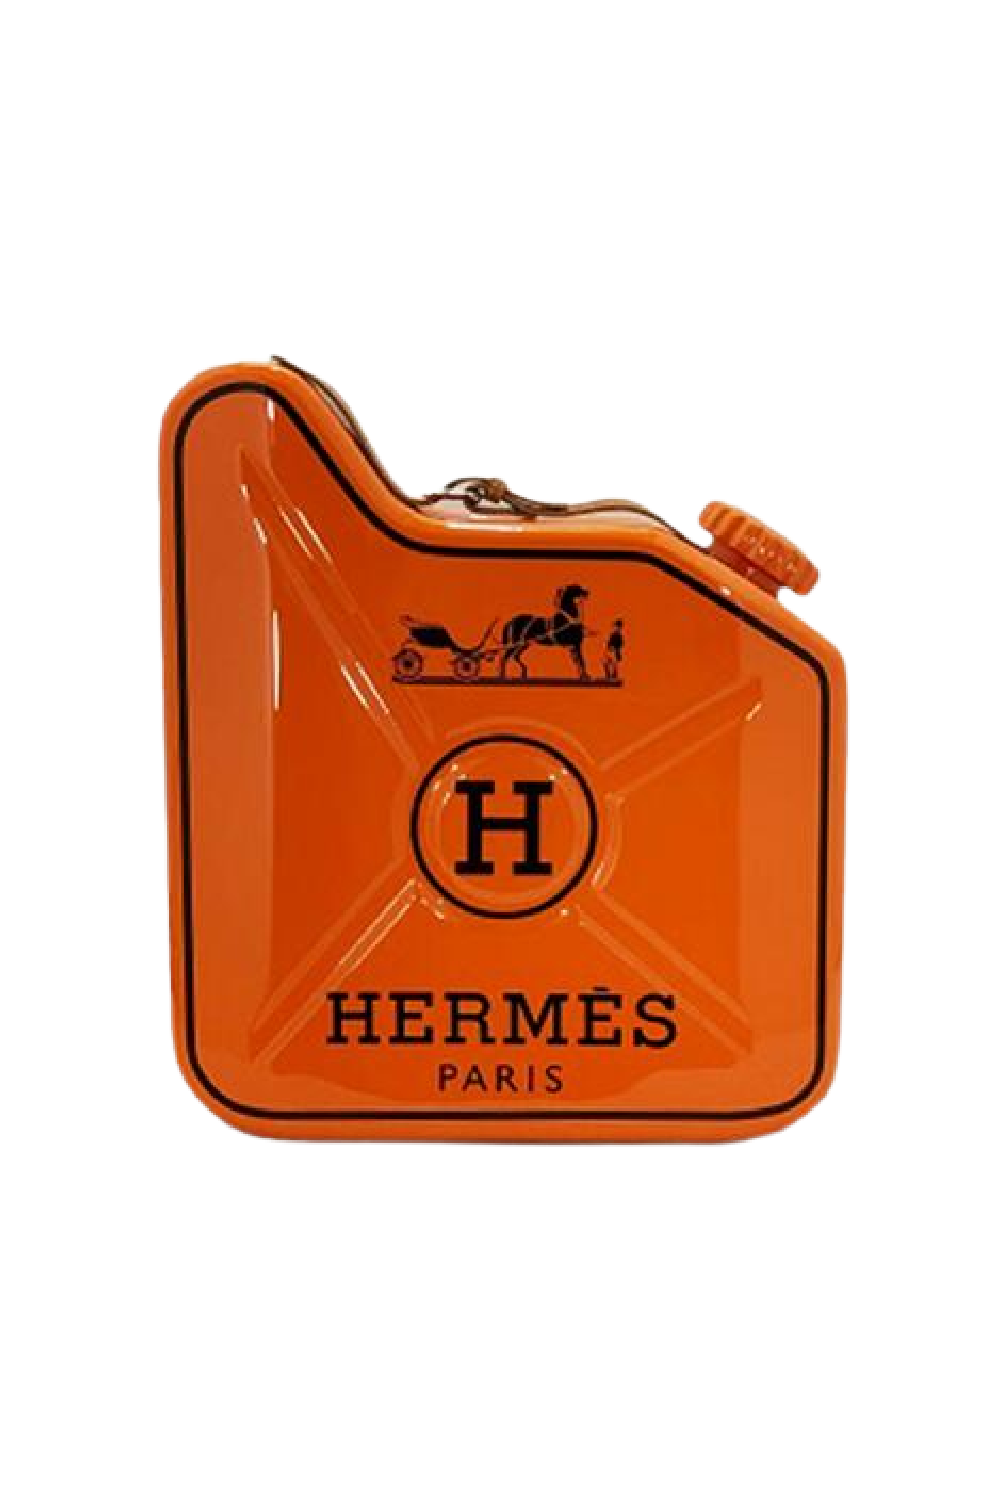 Asians & Hermes, Page 473